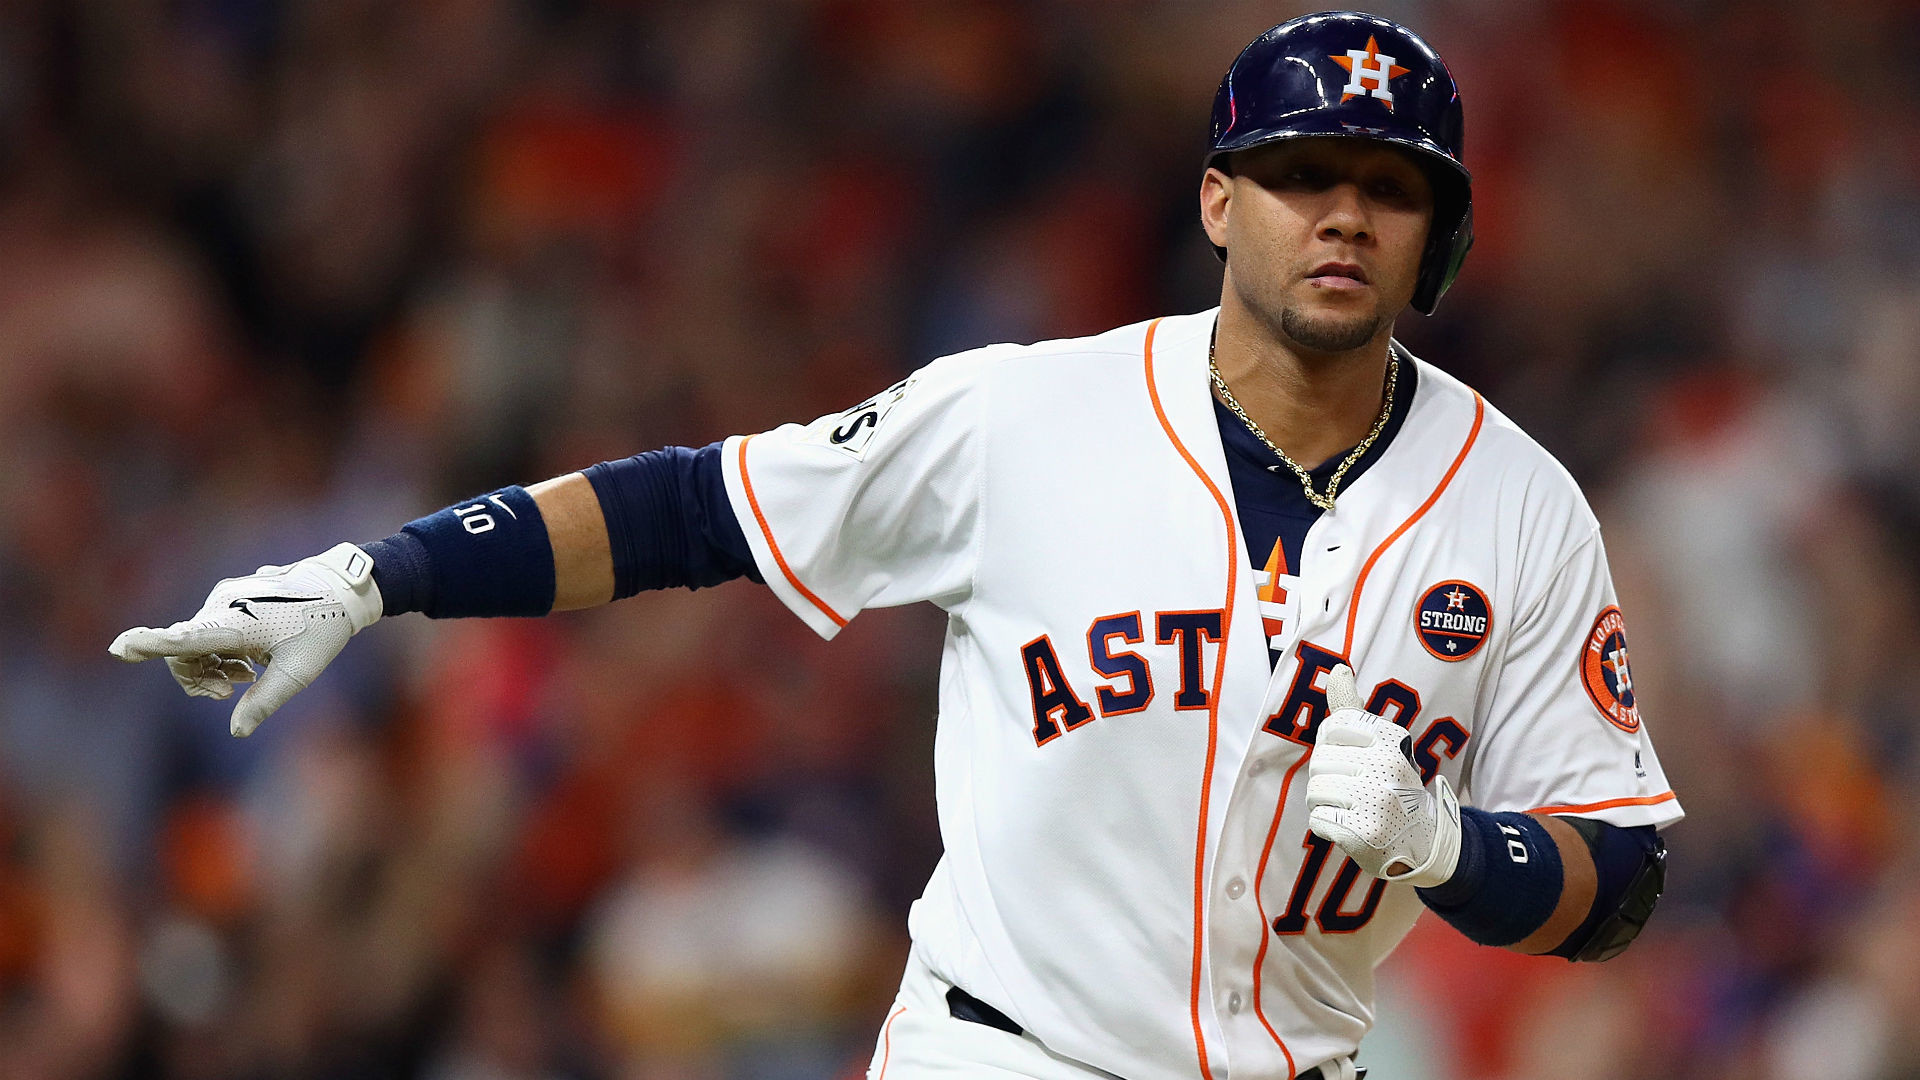 1920x1080 Yuli Gurriel apologizes for Yu Darvish gesture, but faces MLB discipline